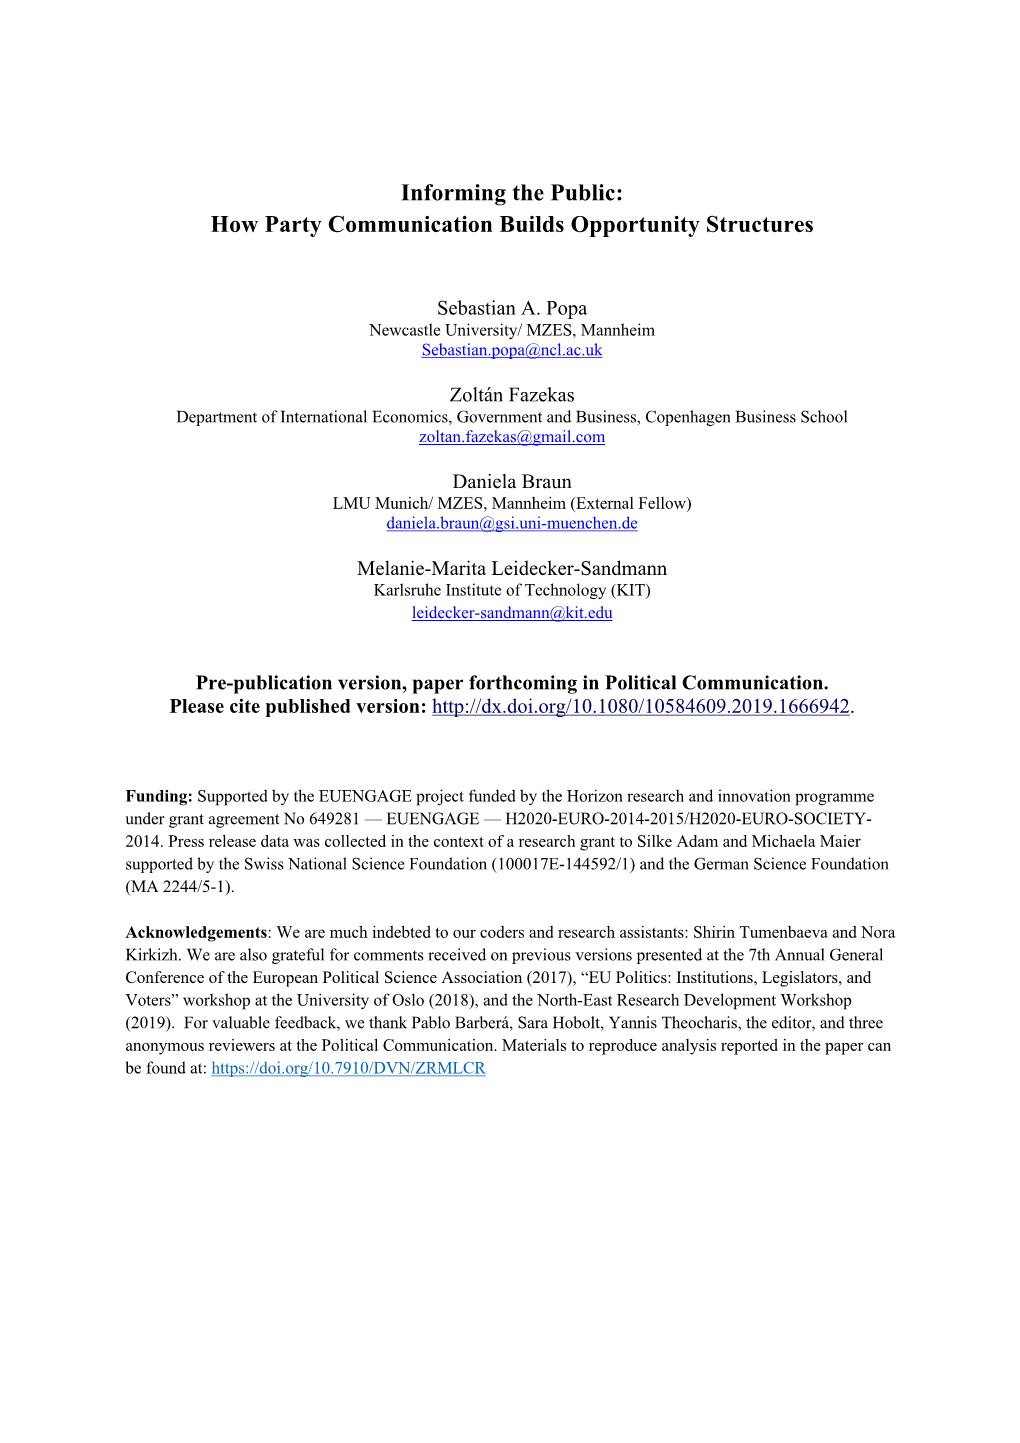 Informing the Public: How Party Communication Builds Opportunity Structures